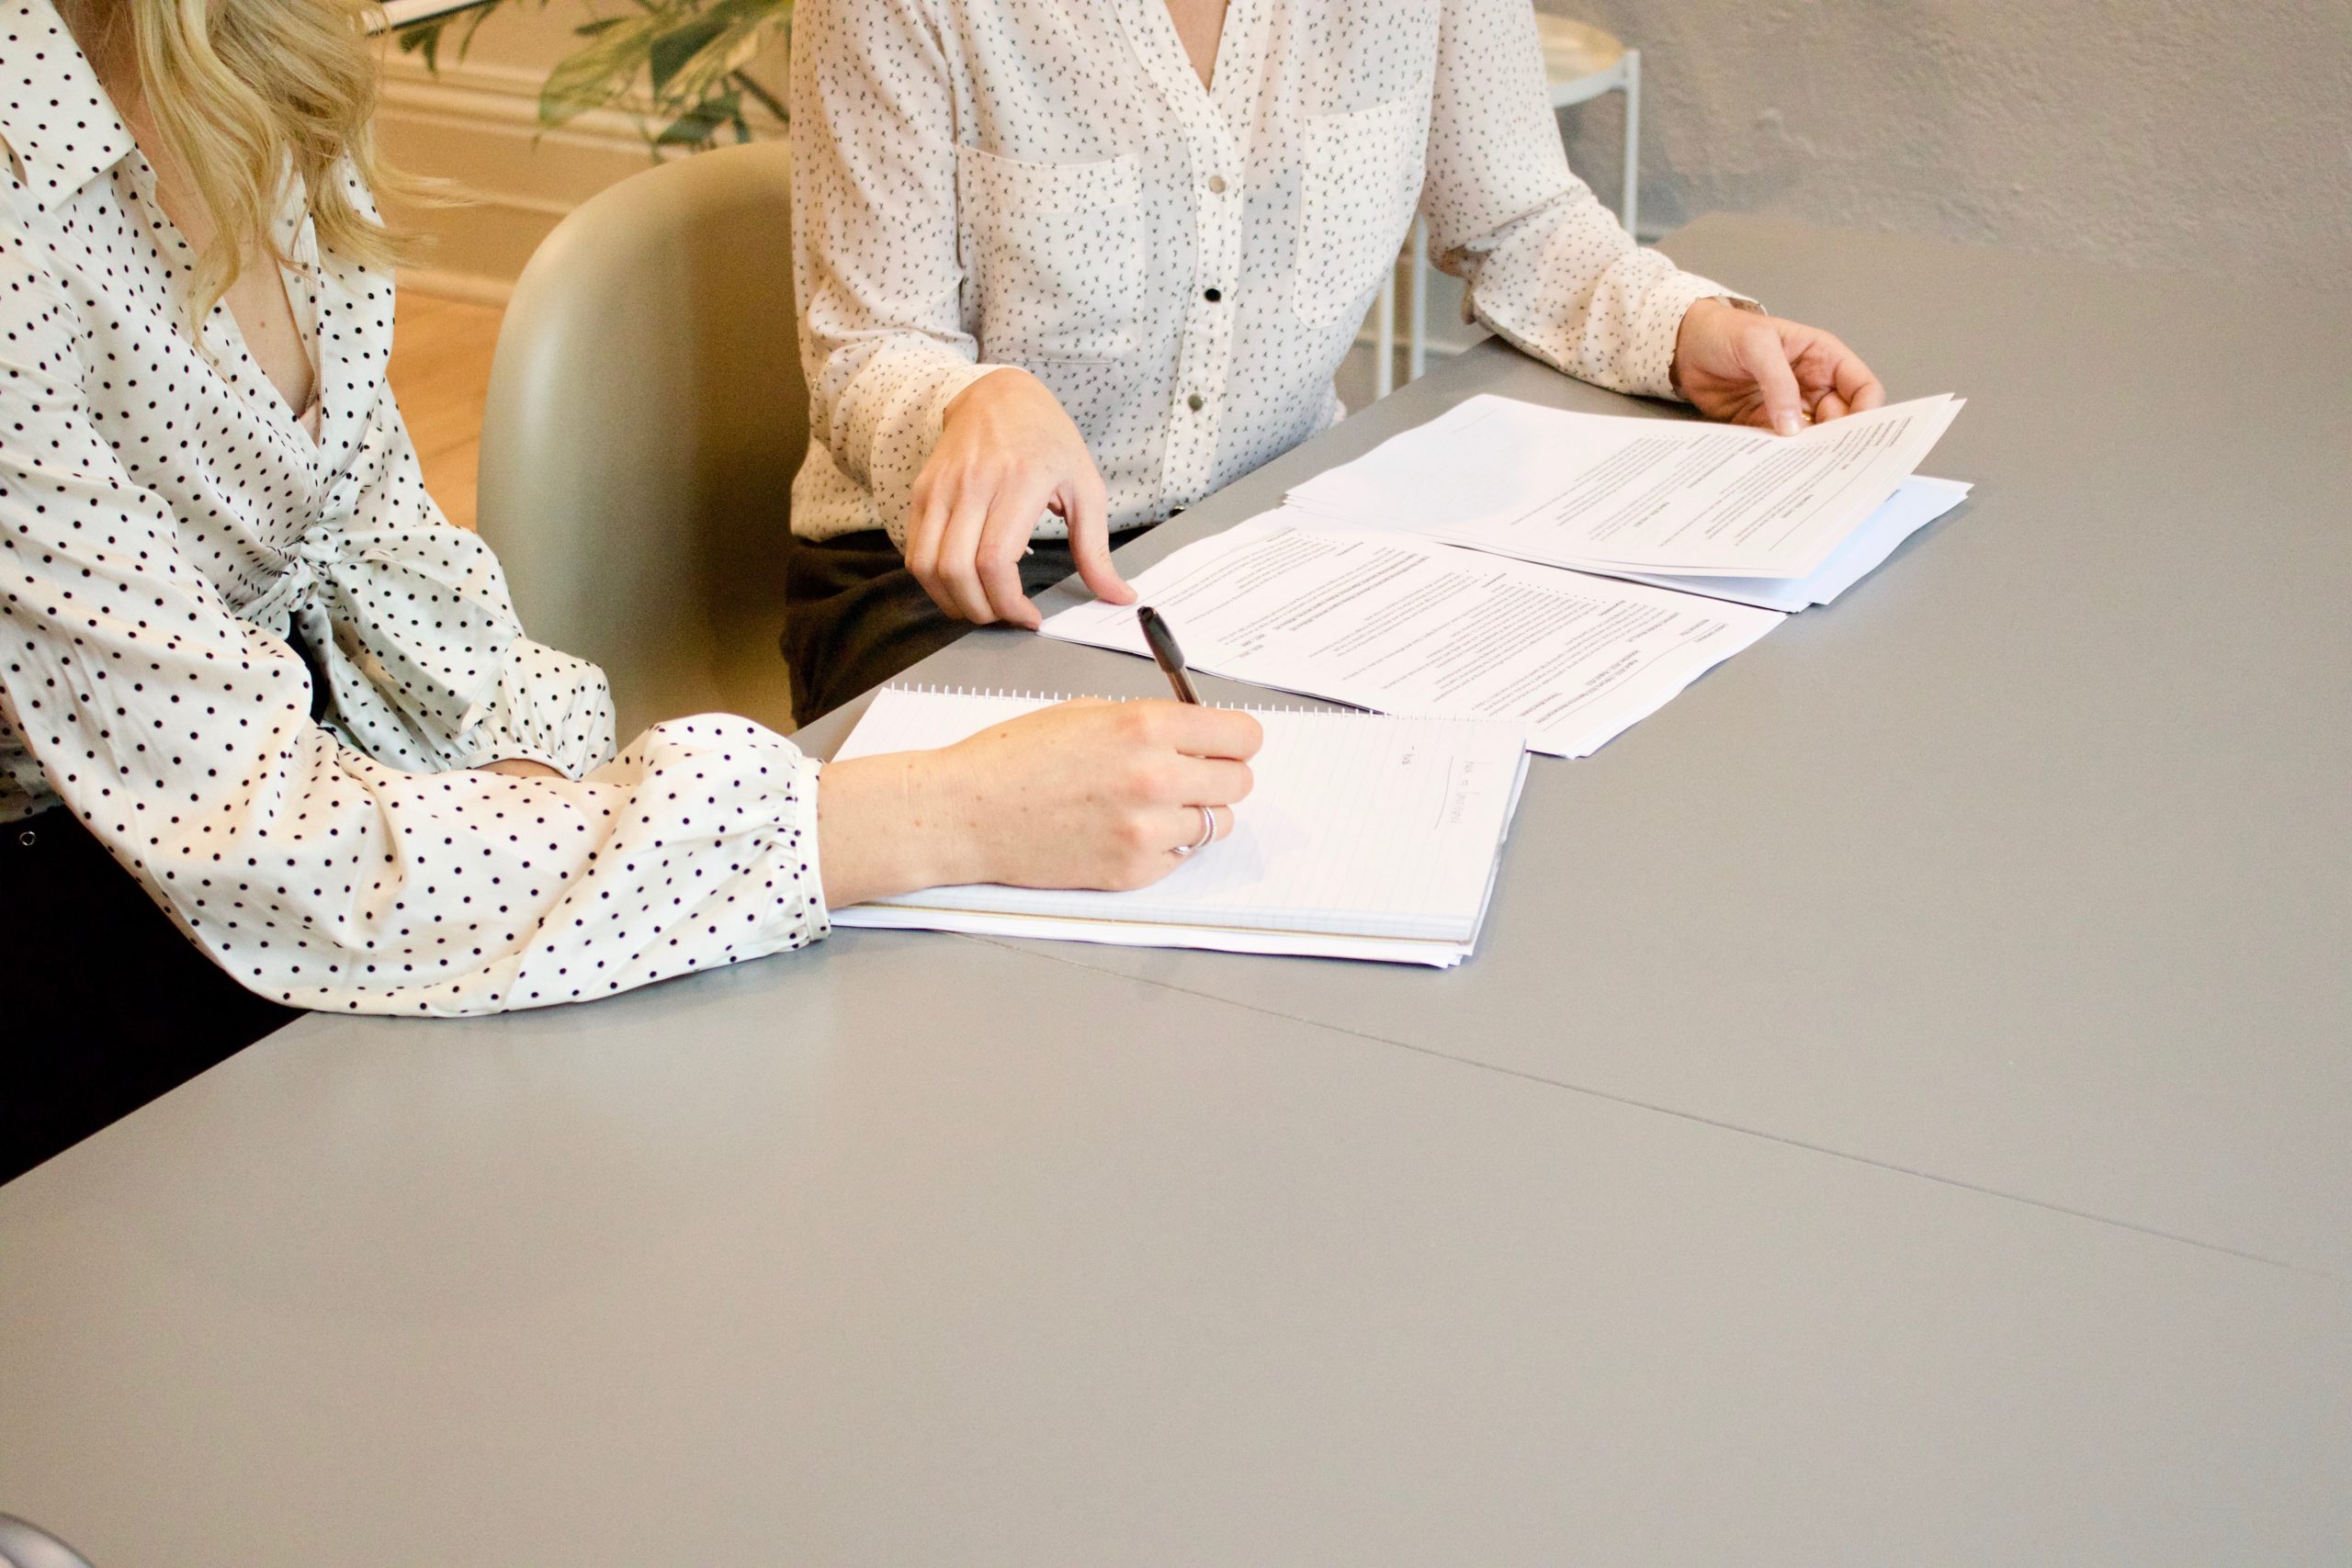 Contract Negotiations: Why Using Your Own Contract Is A Must - Klein Moynihan Turco LLP